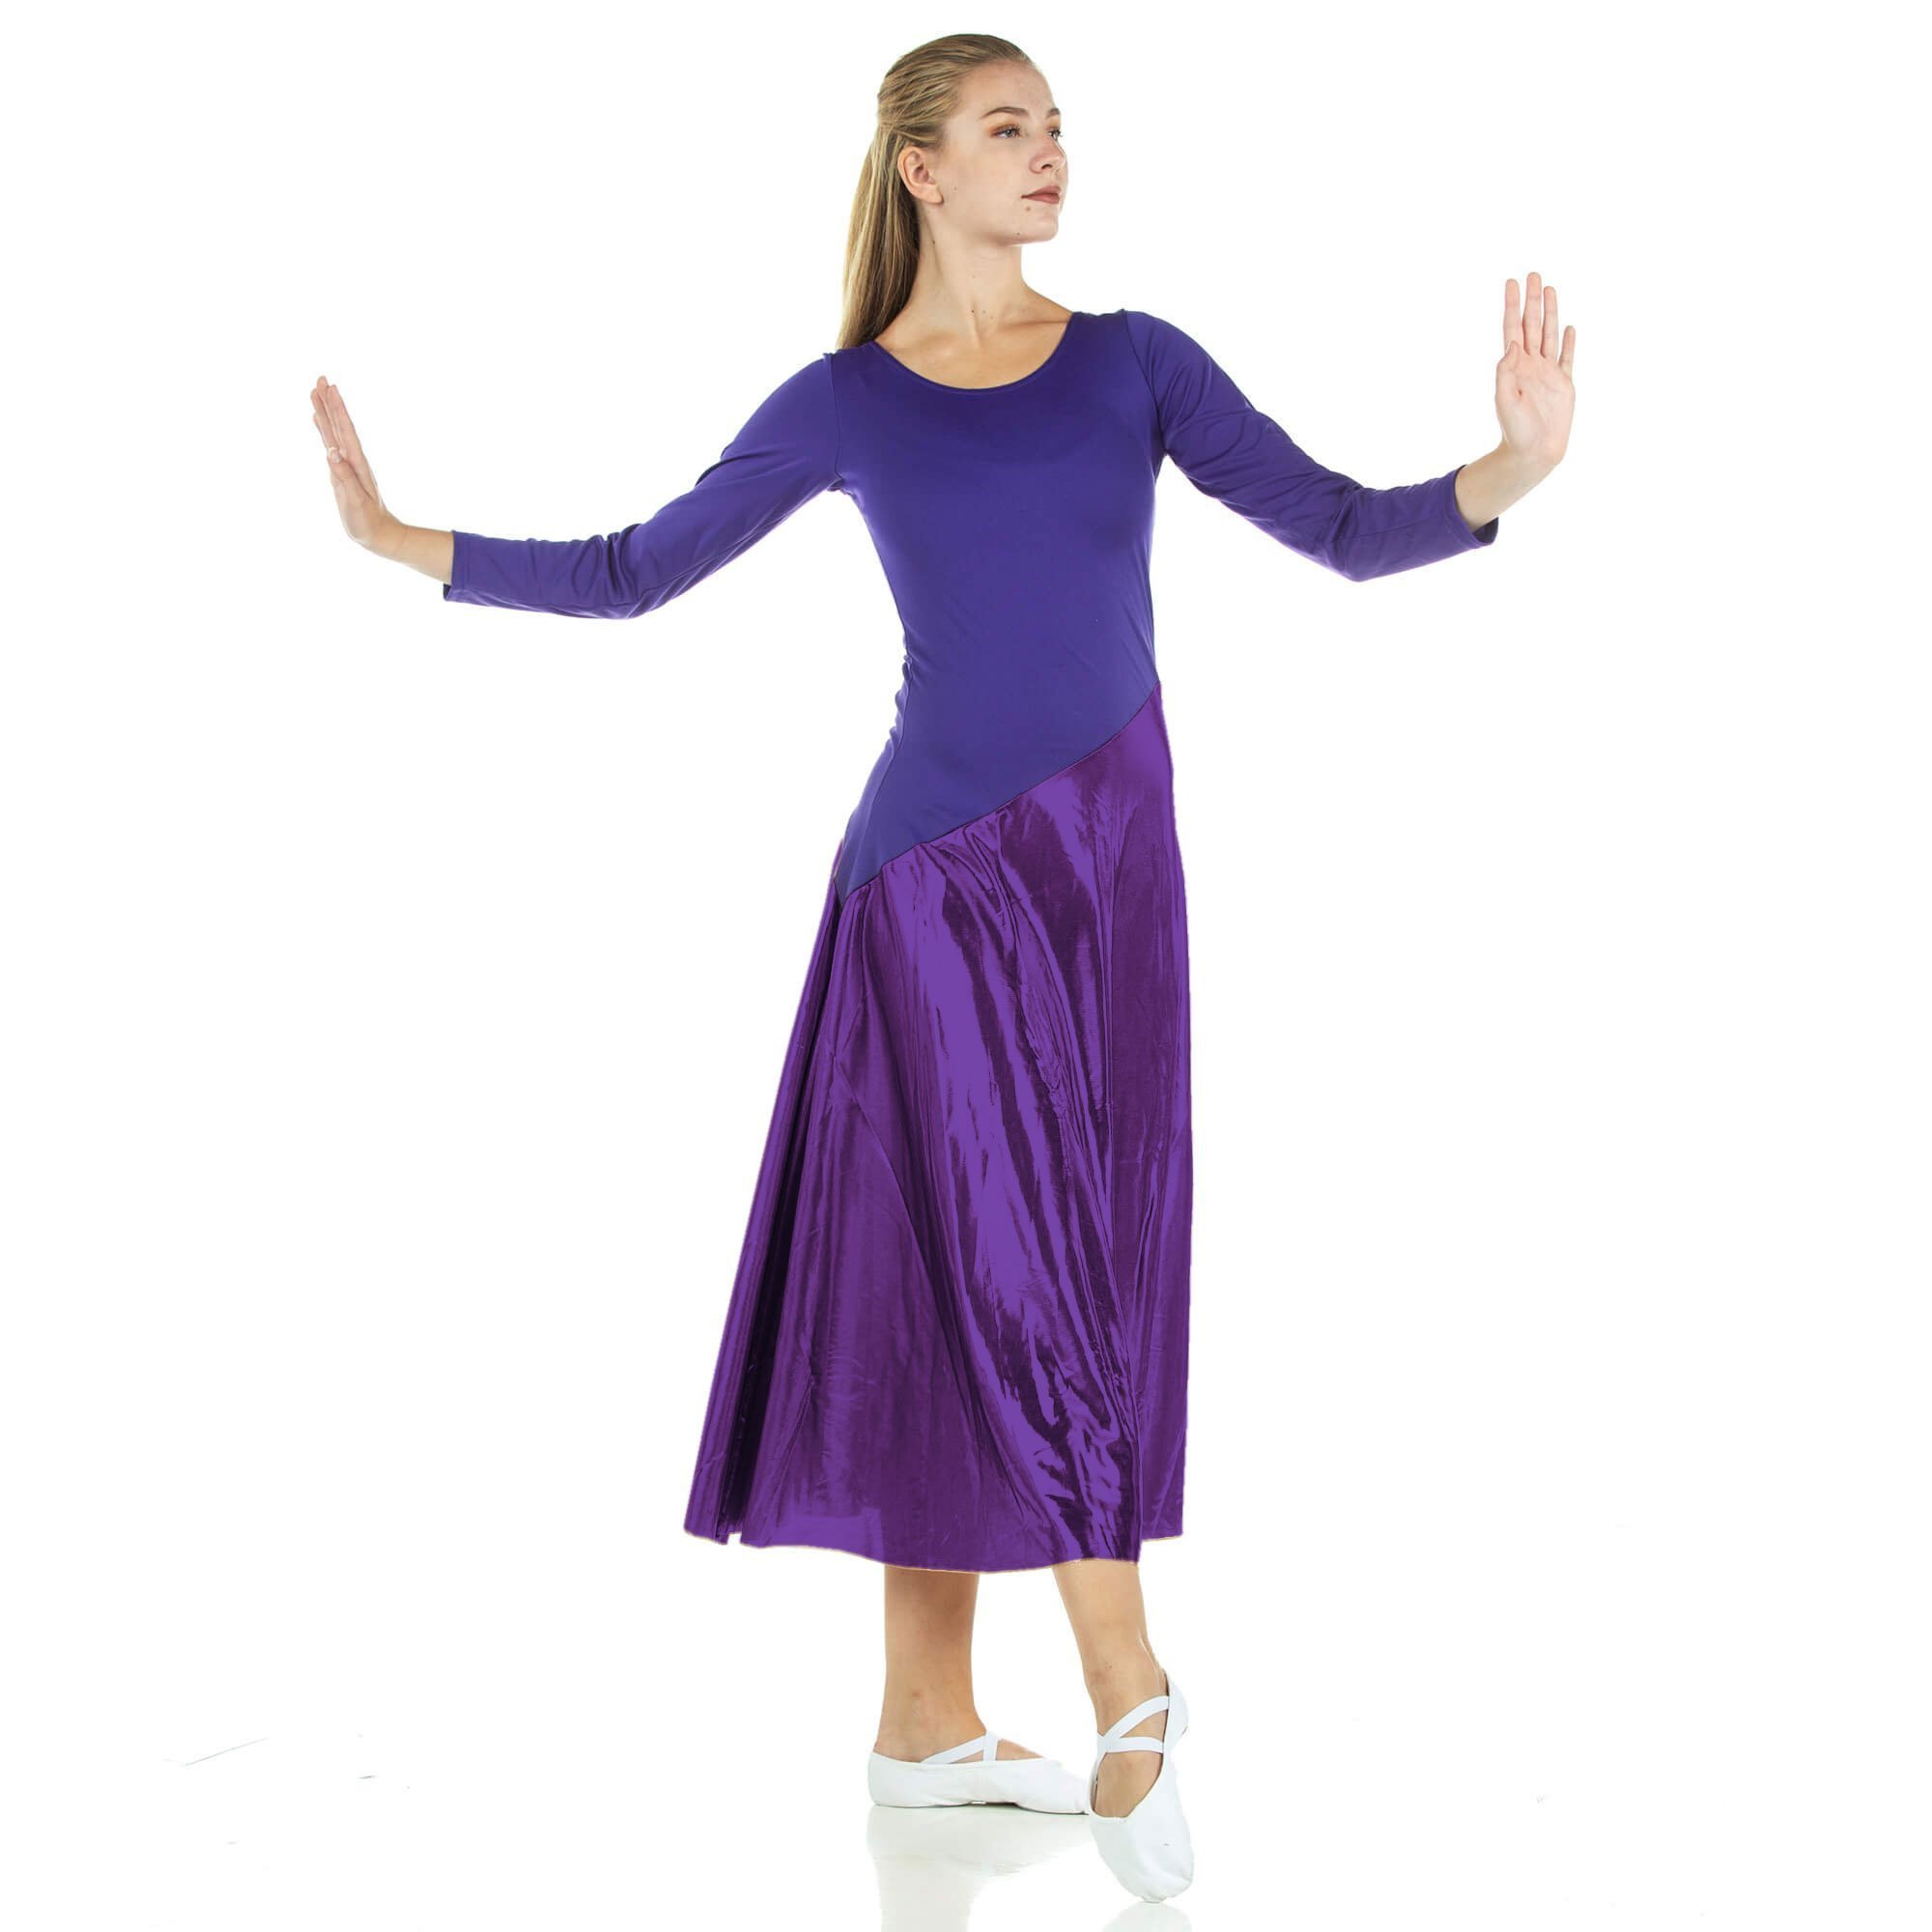 Danzcue Bi Color Long Sleeve Ministry Dance Dress - Click Image to Close